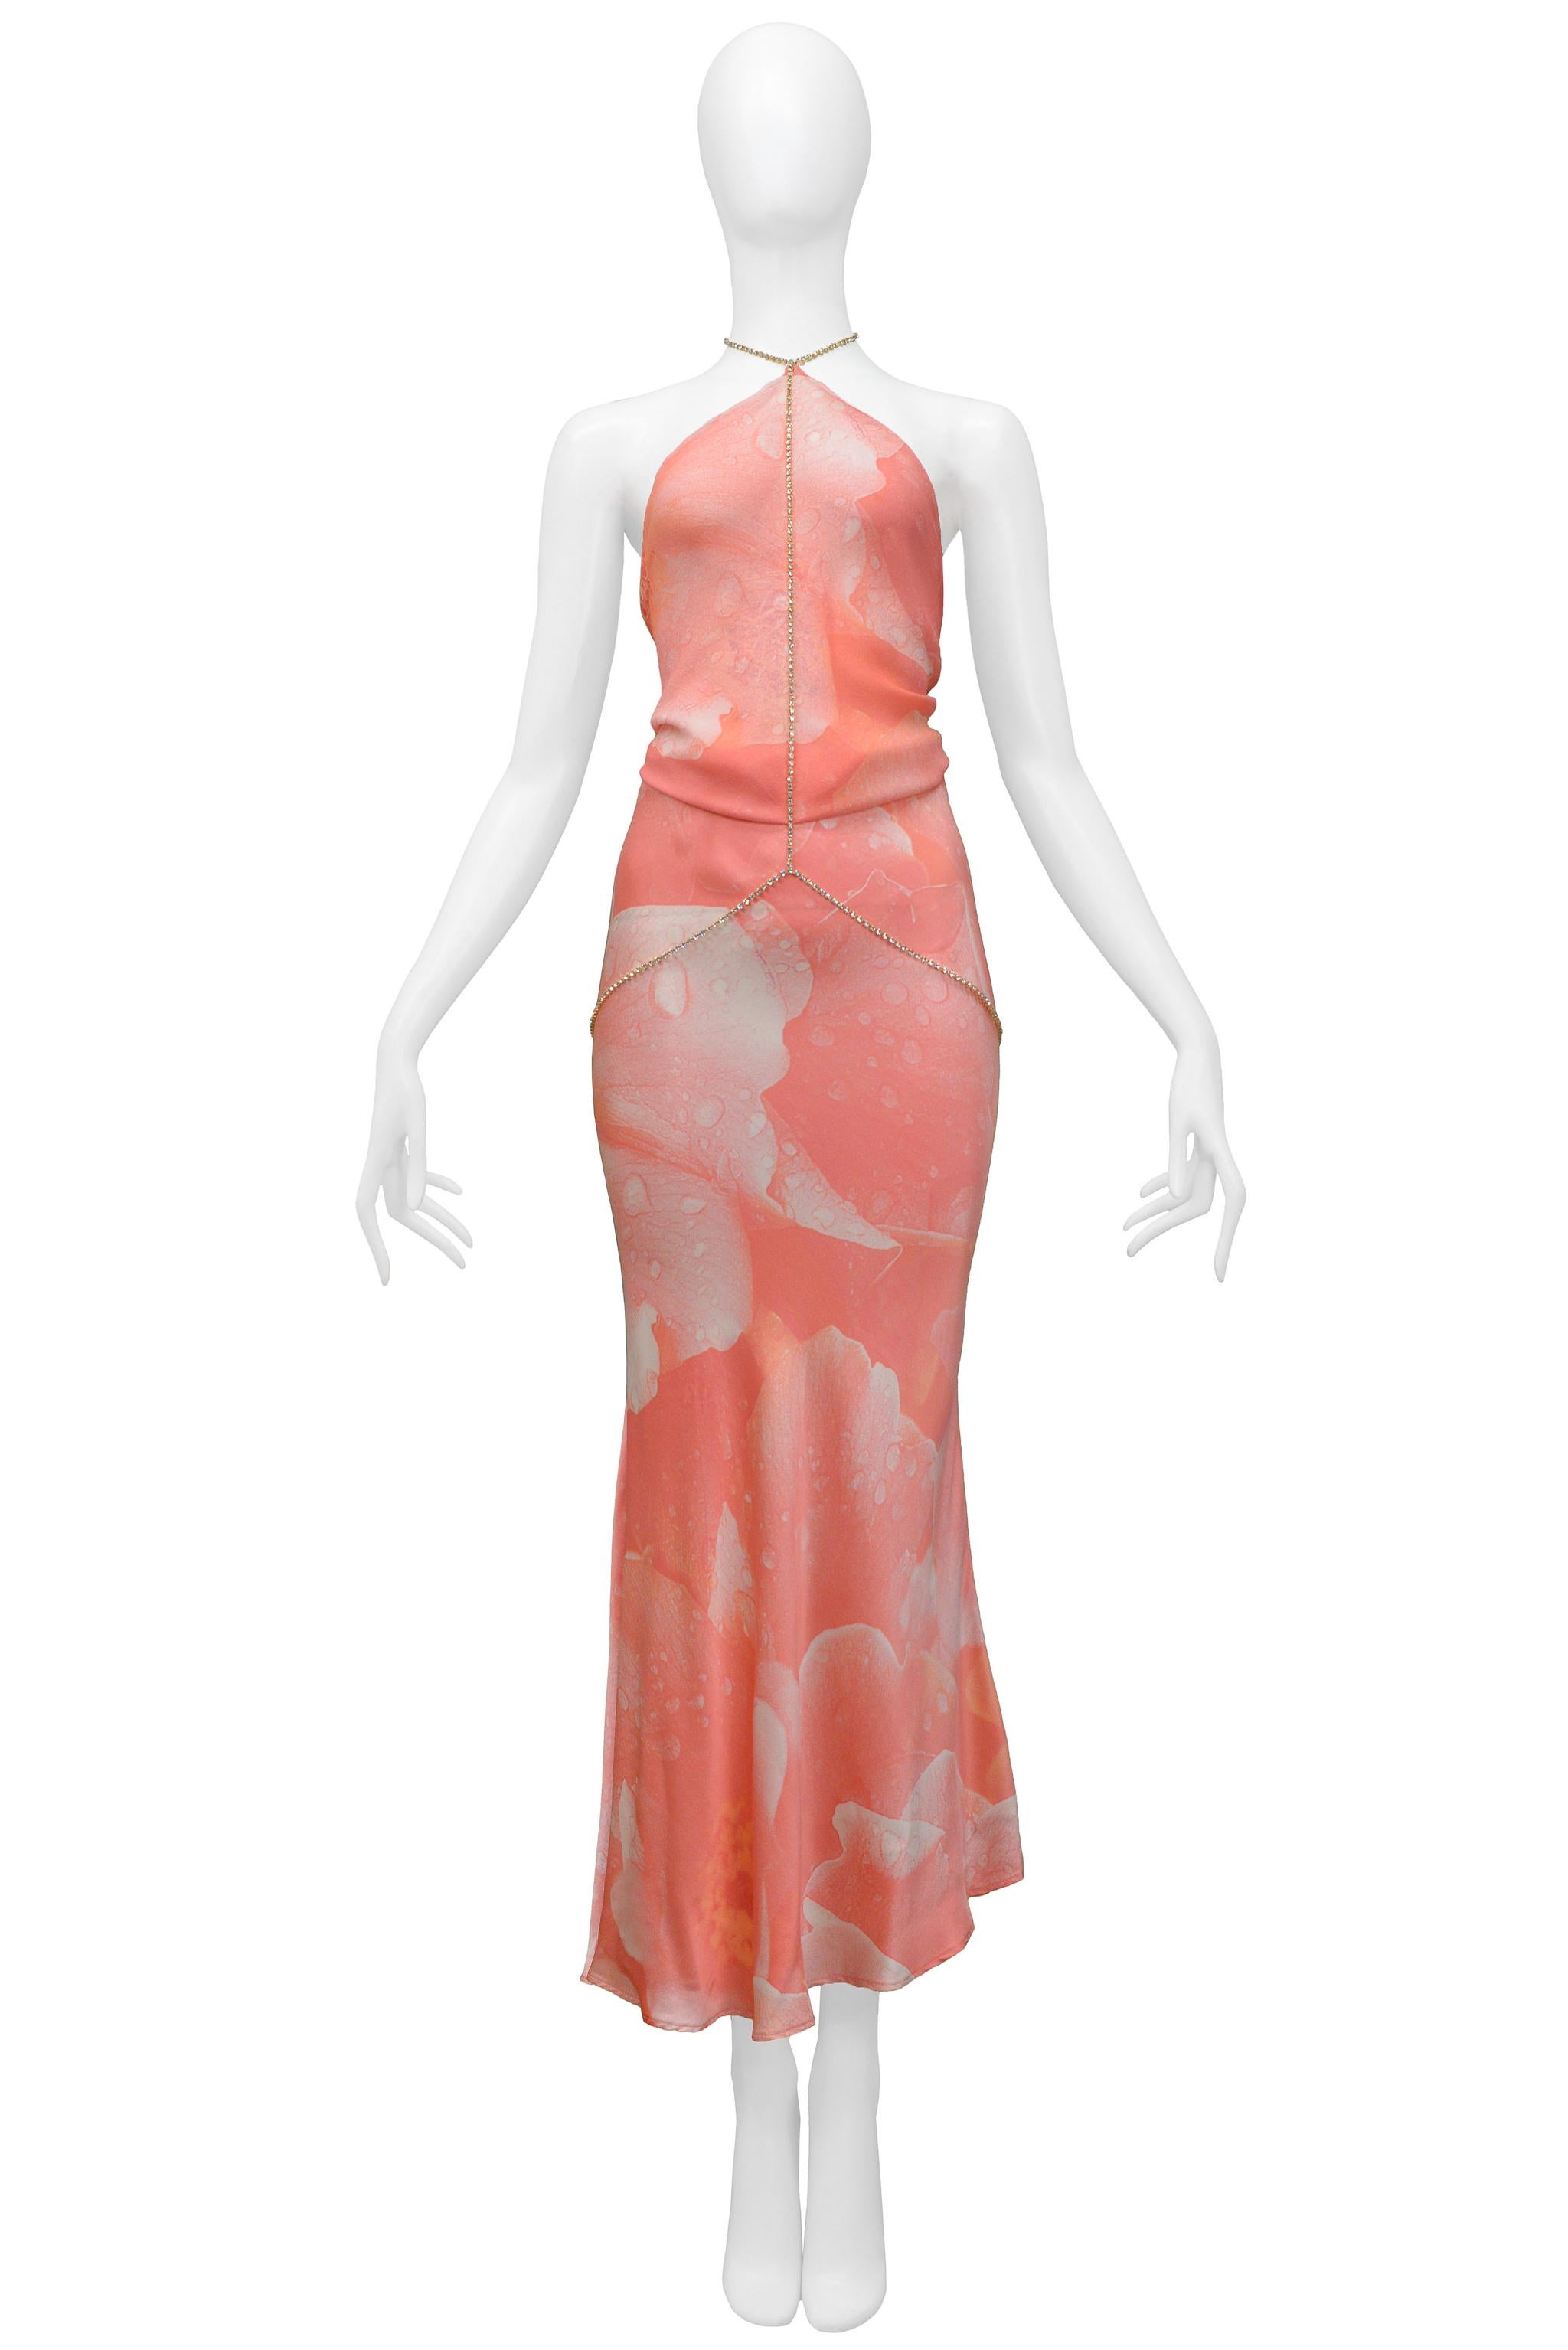 Resurrection Vintage is excited to present a vintage Roberto Cavalli pink printed evening gown featuring a halter neck and tie-back bodice, attached clear rhinestone with a gold-tone bezel belly chain, and uneven hem. 

Roberto Cavalli
Size: